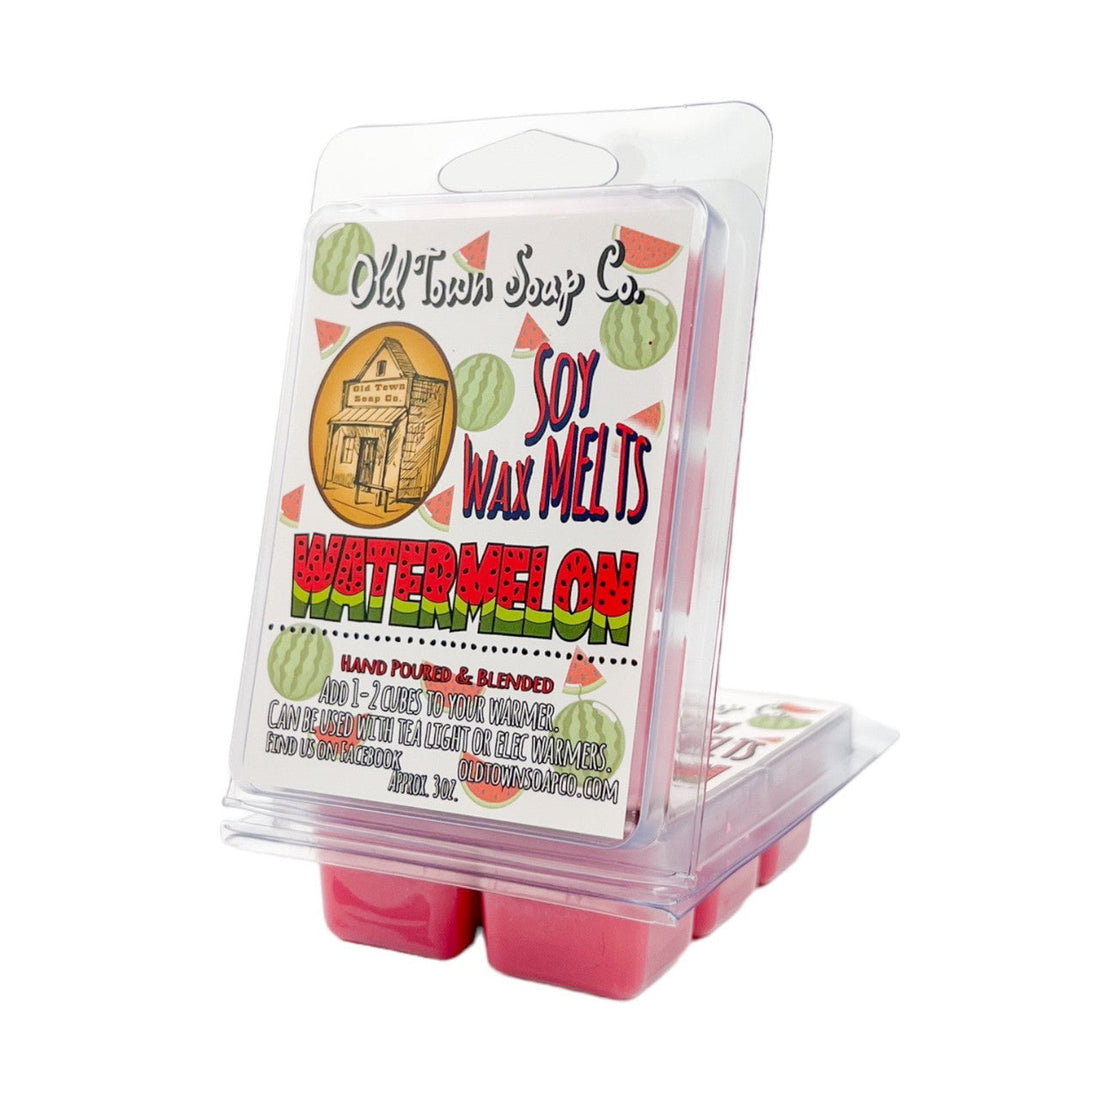 Watermelon -Wax Melts - Old Town Soap Co.